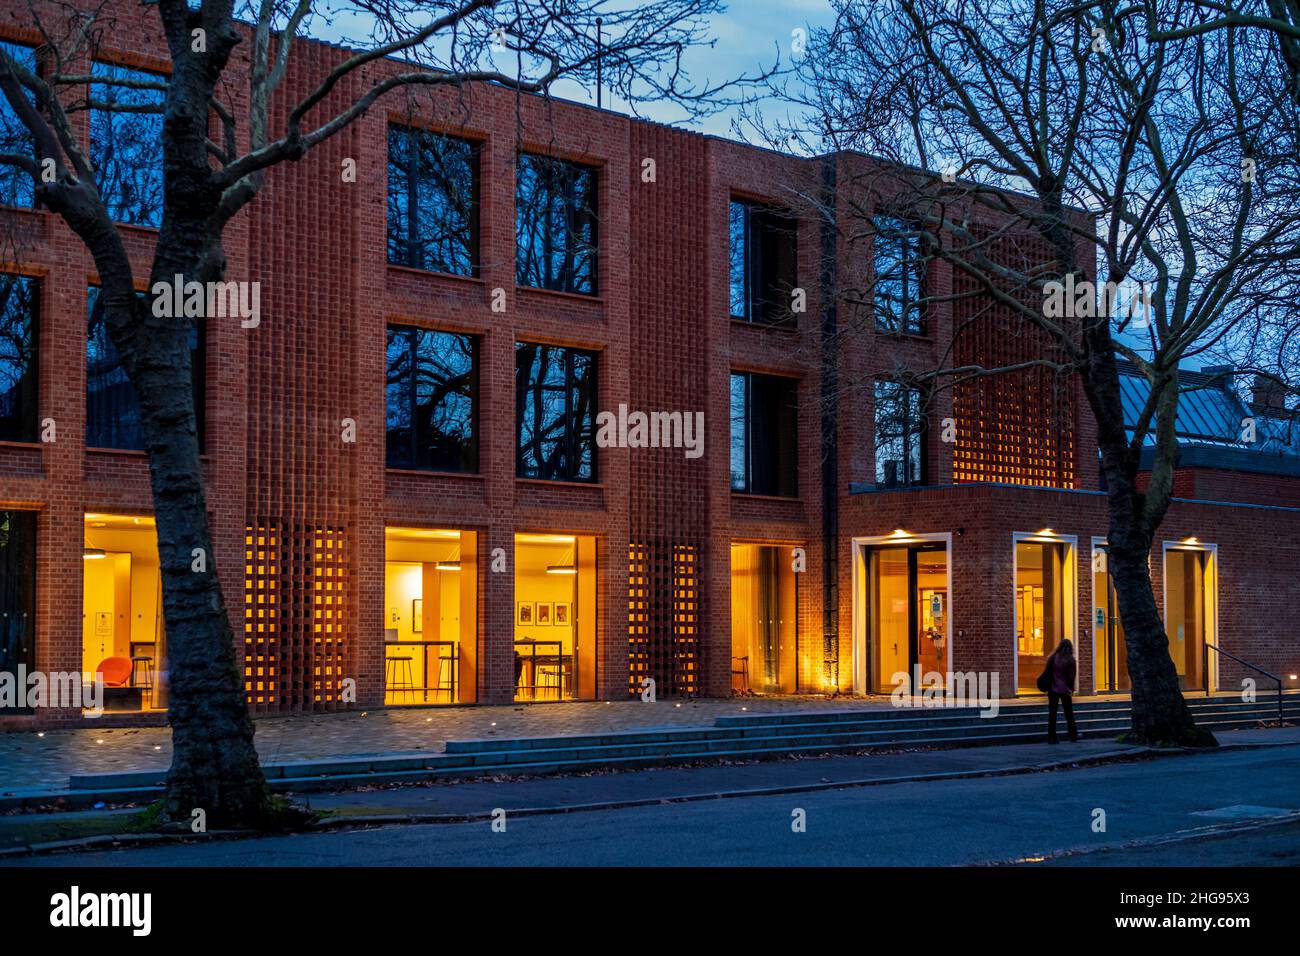 The Dorothy Garrod building Newnham College Cambridge University - Architects Walters & Cohen 2019 - RIBA East Building of the Year 2019 Stock Photo